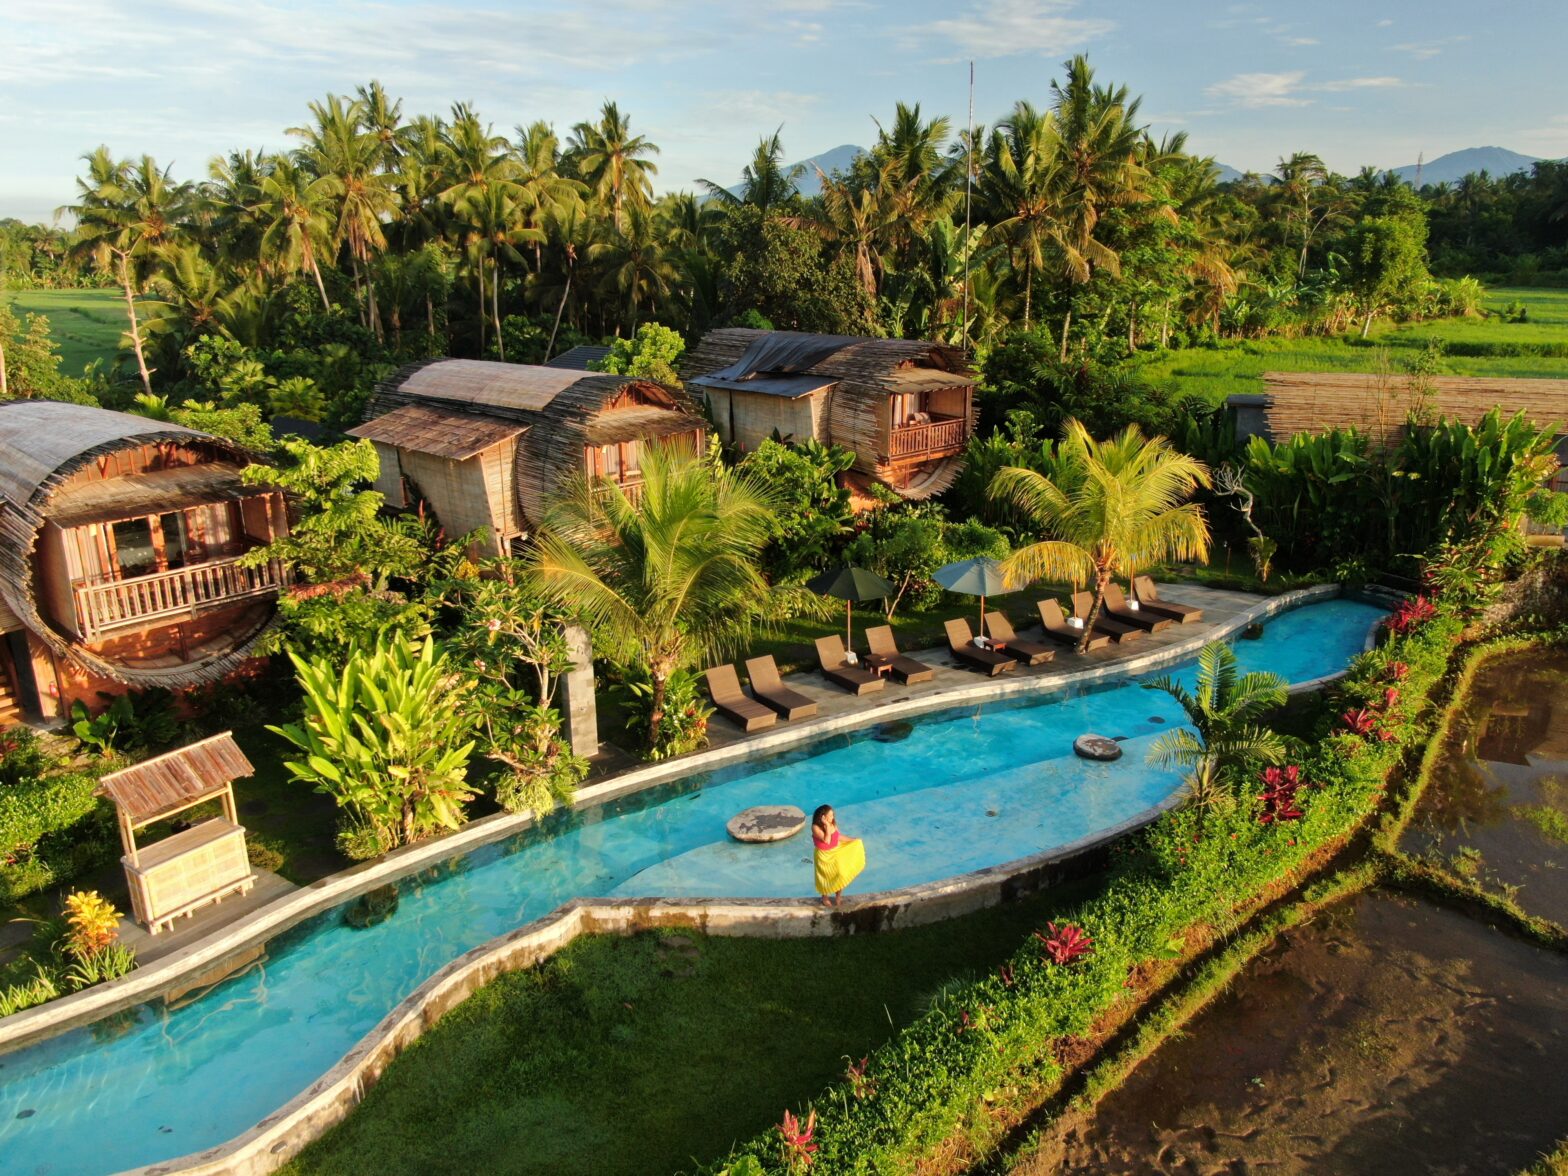 The outside exterior of the Beehouse Dijiwa in Ubud, Bali with the lagoon pool.